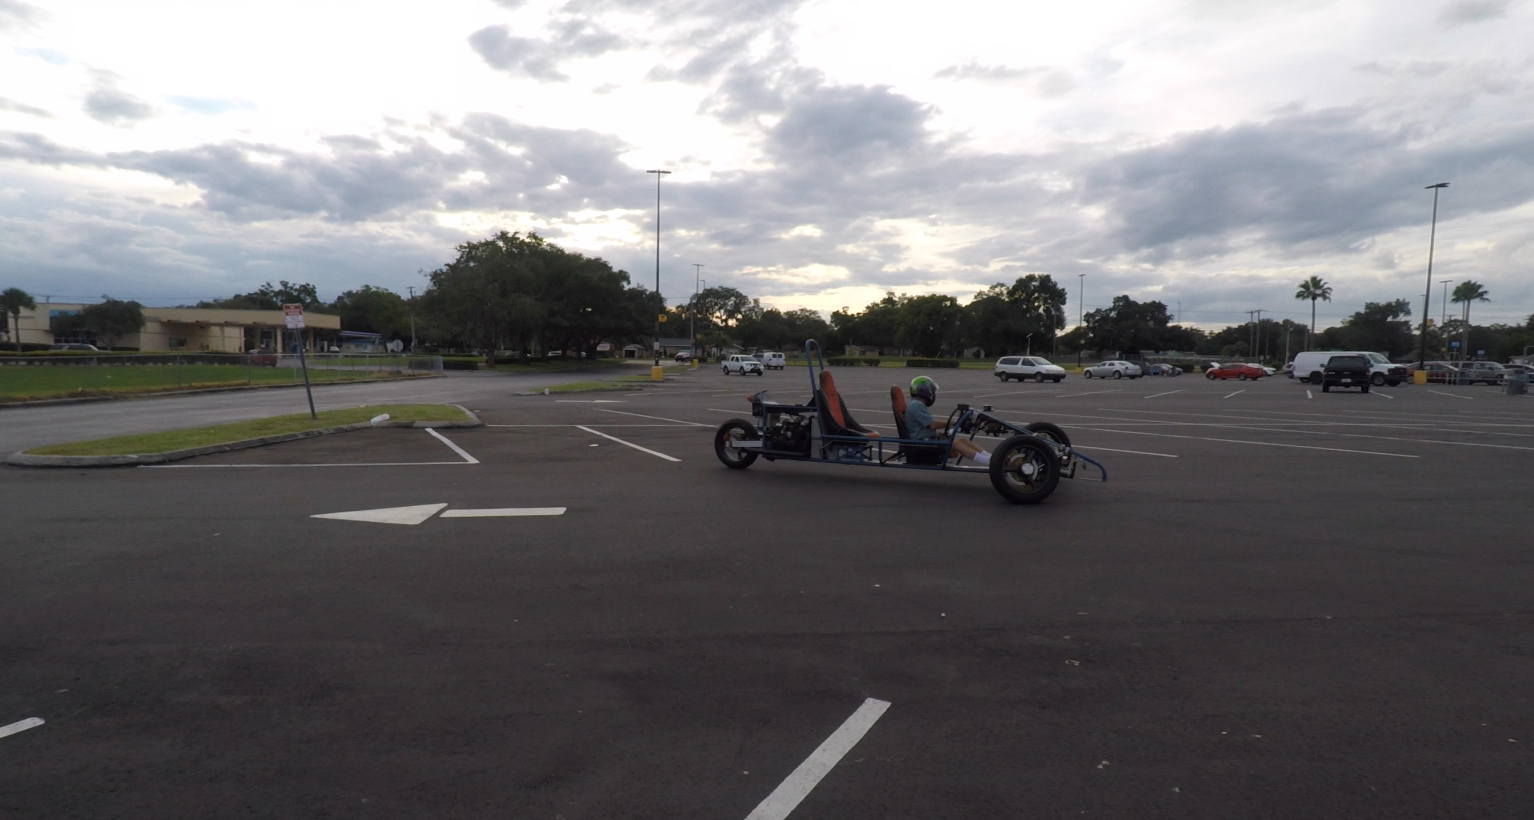 Second Prototype Trike Driving in Parking Lot